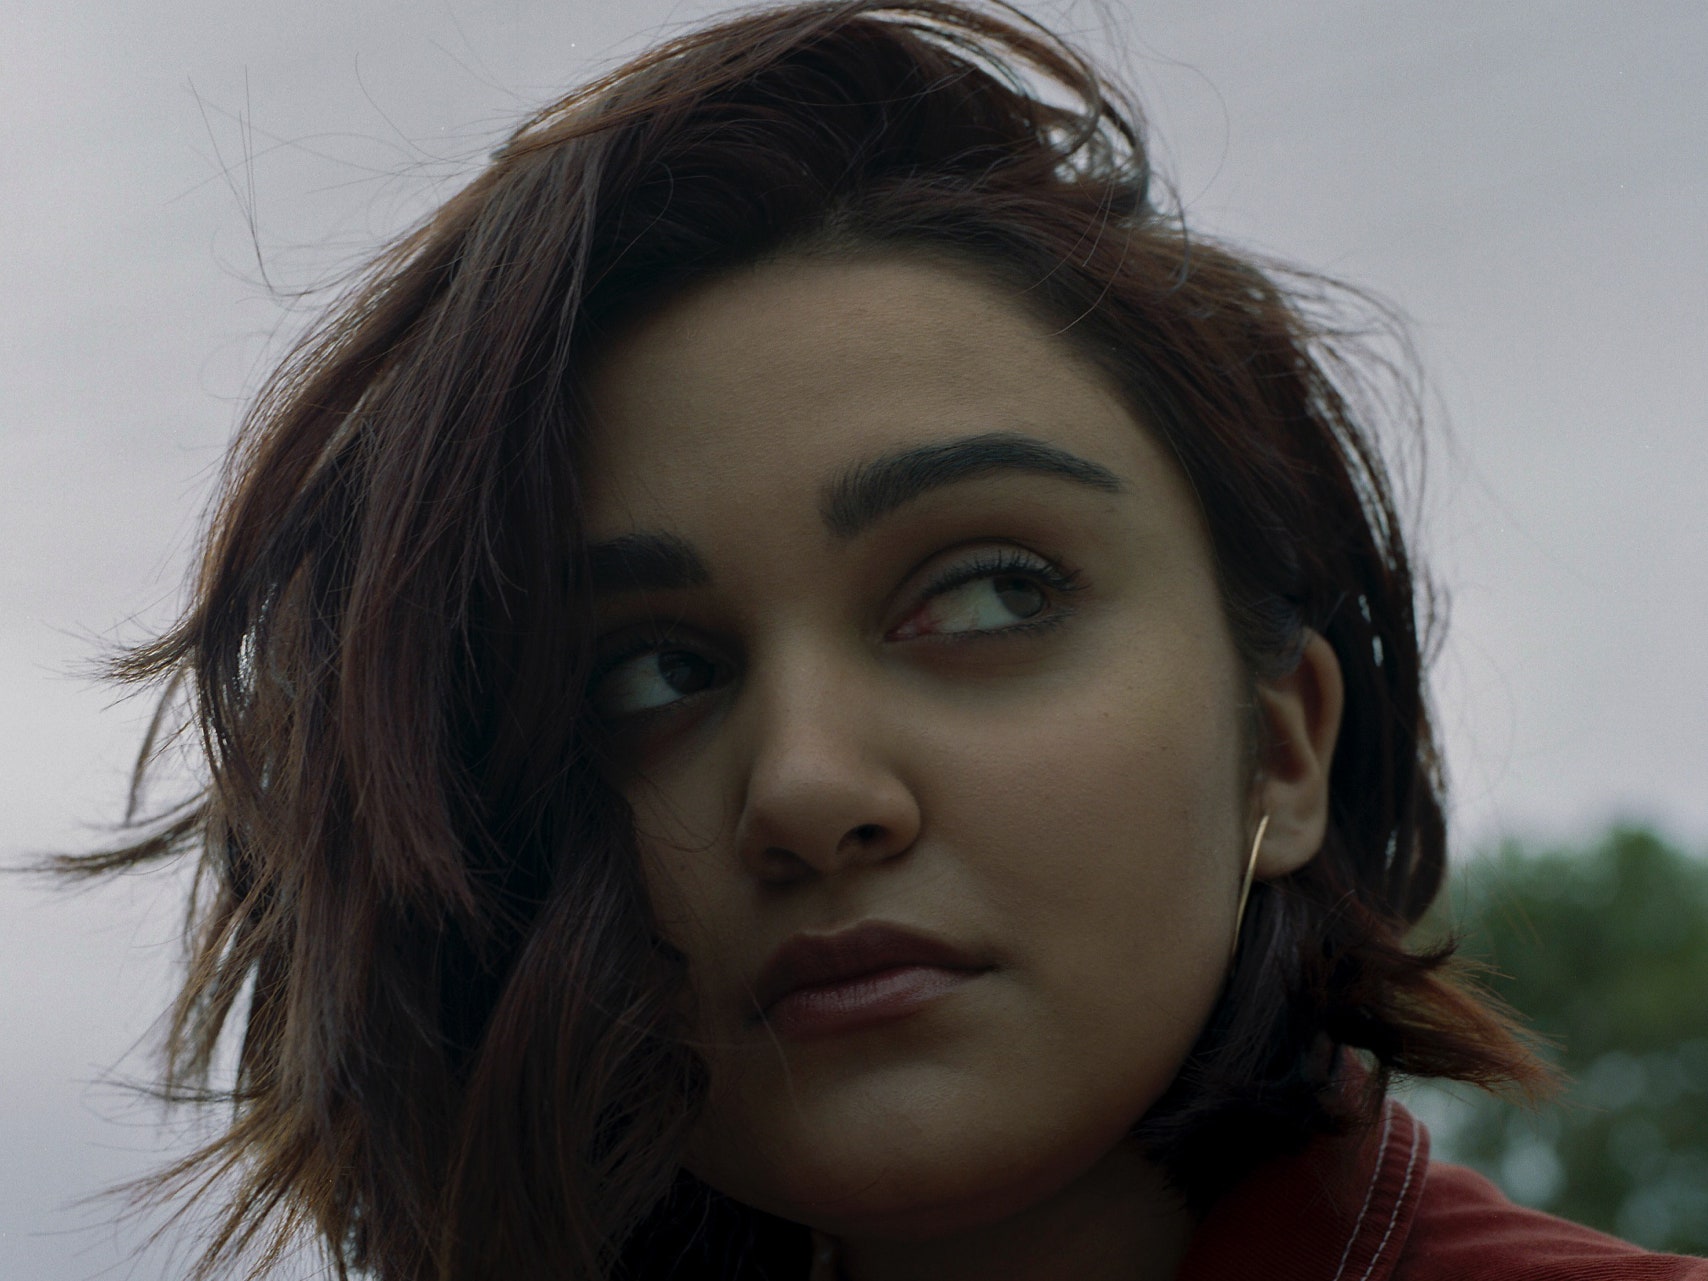 Marvel's Runaways Star Ariela Barer on Bringing Gert to Life and the Power of Representation